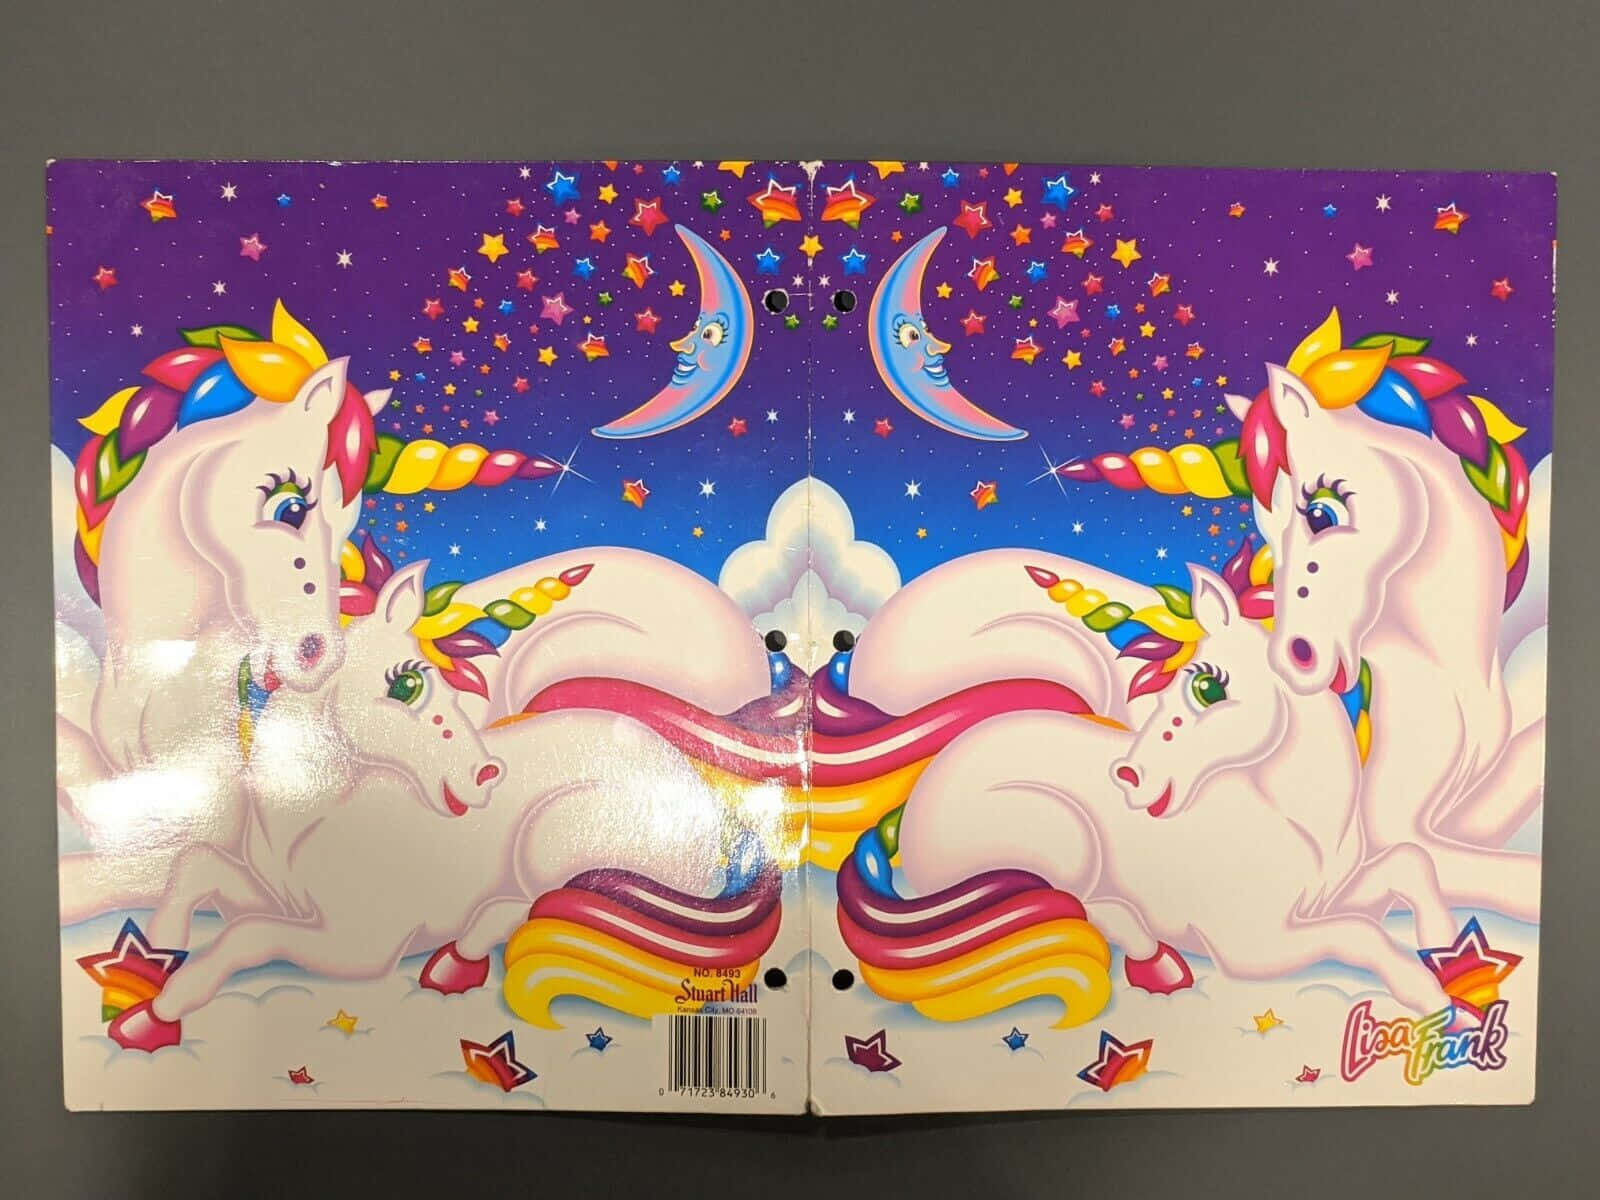 Take a rainbow ride with your trusty steed - an iconic Lisa Frank Unicorn 🌈 Wallpaper